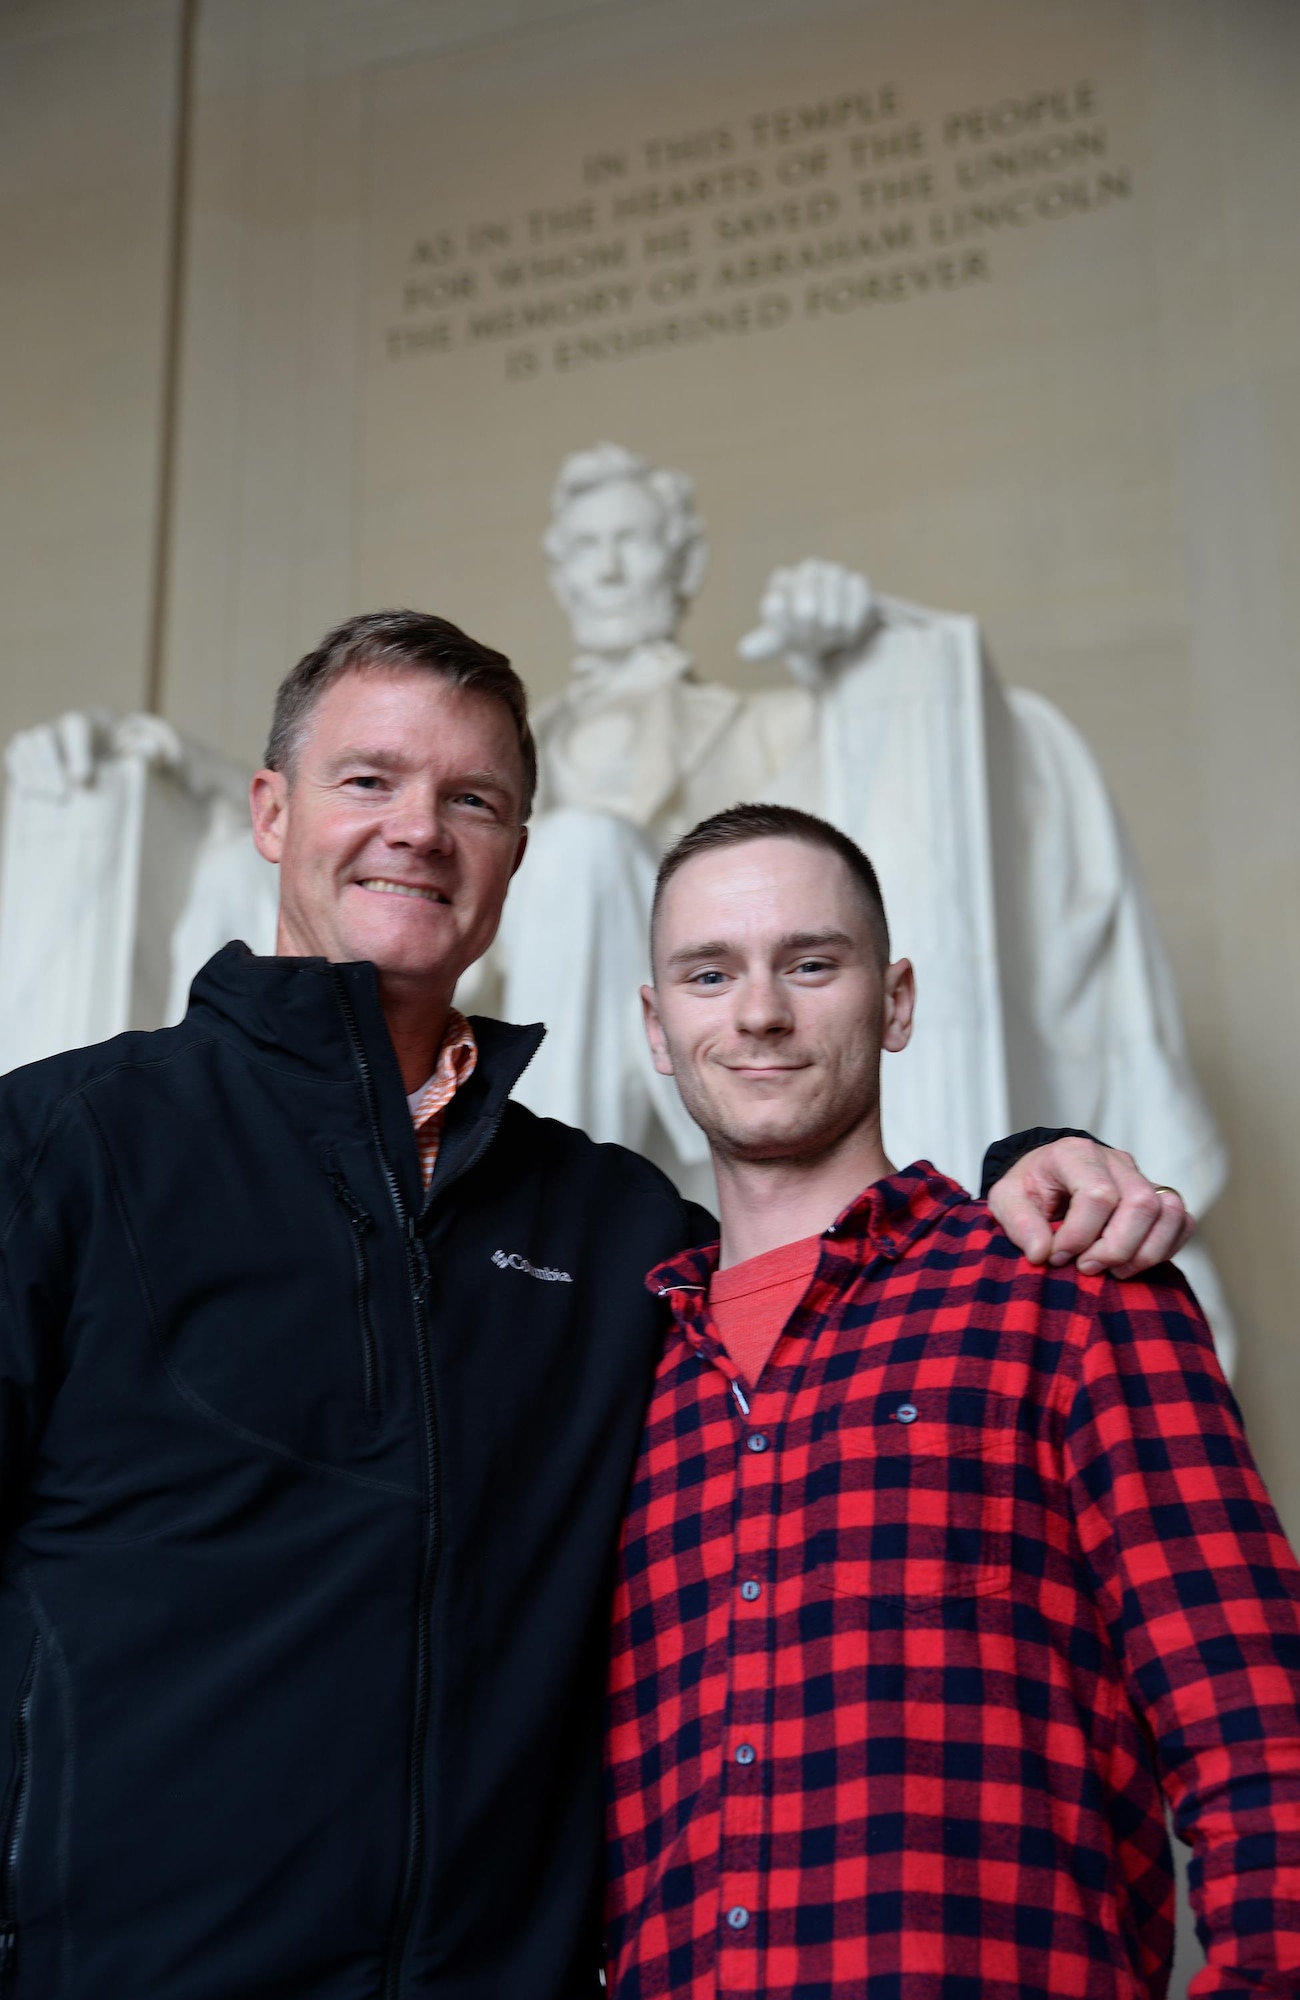 Staff Sgt. Cody Sparks, right, Air Education and Training Command Airman of the Year, poses with Col. Thomas Shank, left, 47th Flying Training Wing commander, in front of the Lincoln Memorial April 11, 2016. During a visit to Capitol Hill to inform congressional leadership about Laughlin Air Force Base, Sparks toured memorials learning about Air Force heritage from his wing commander.